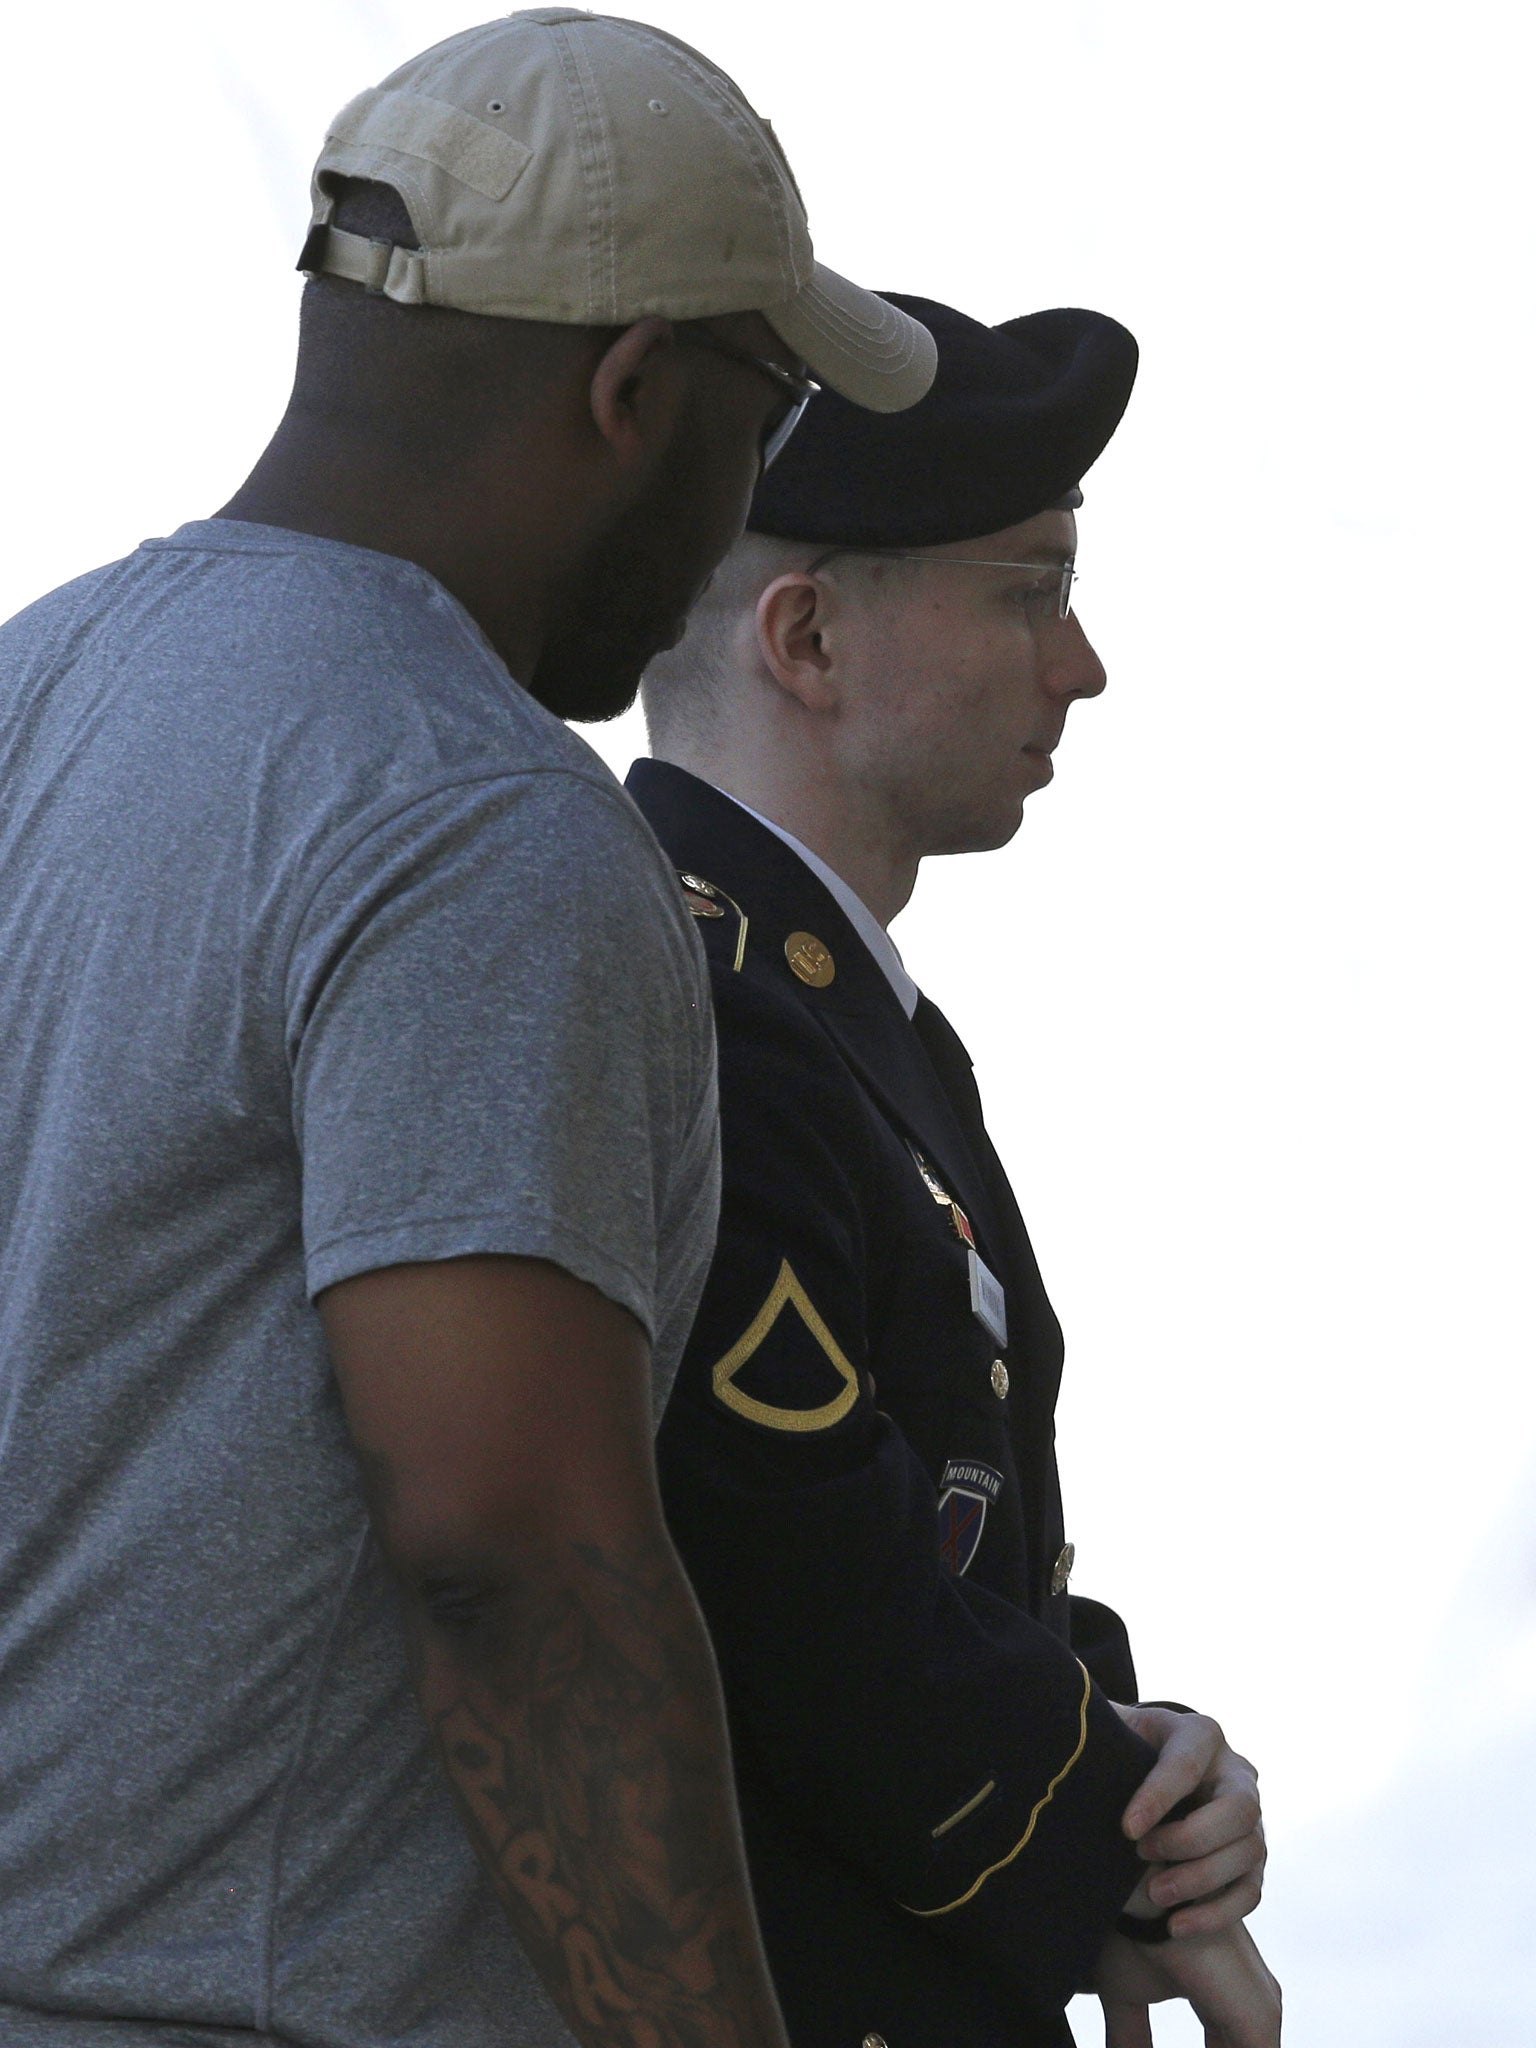 Bradley Manning is escorted into a courthouse before a court martial hearing